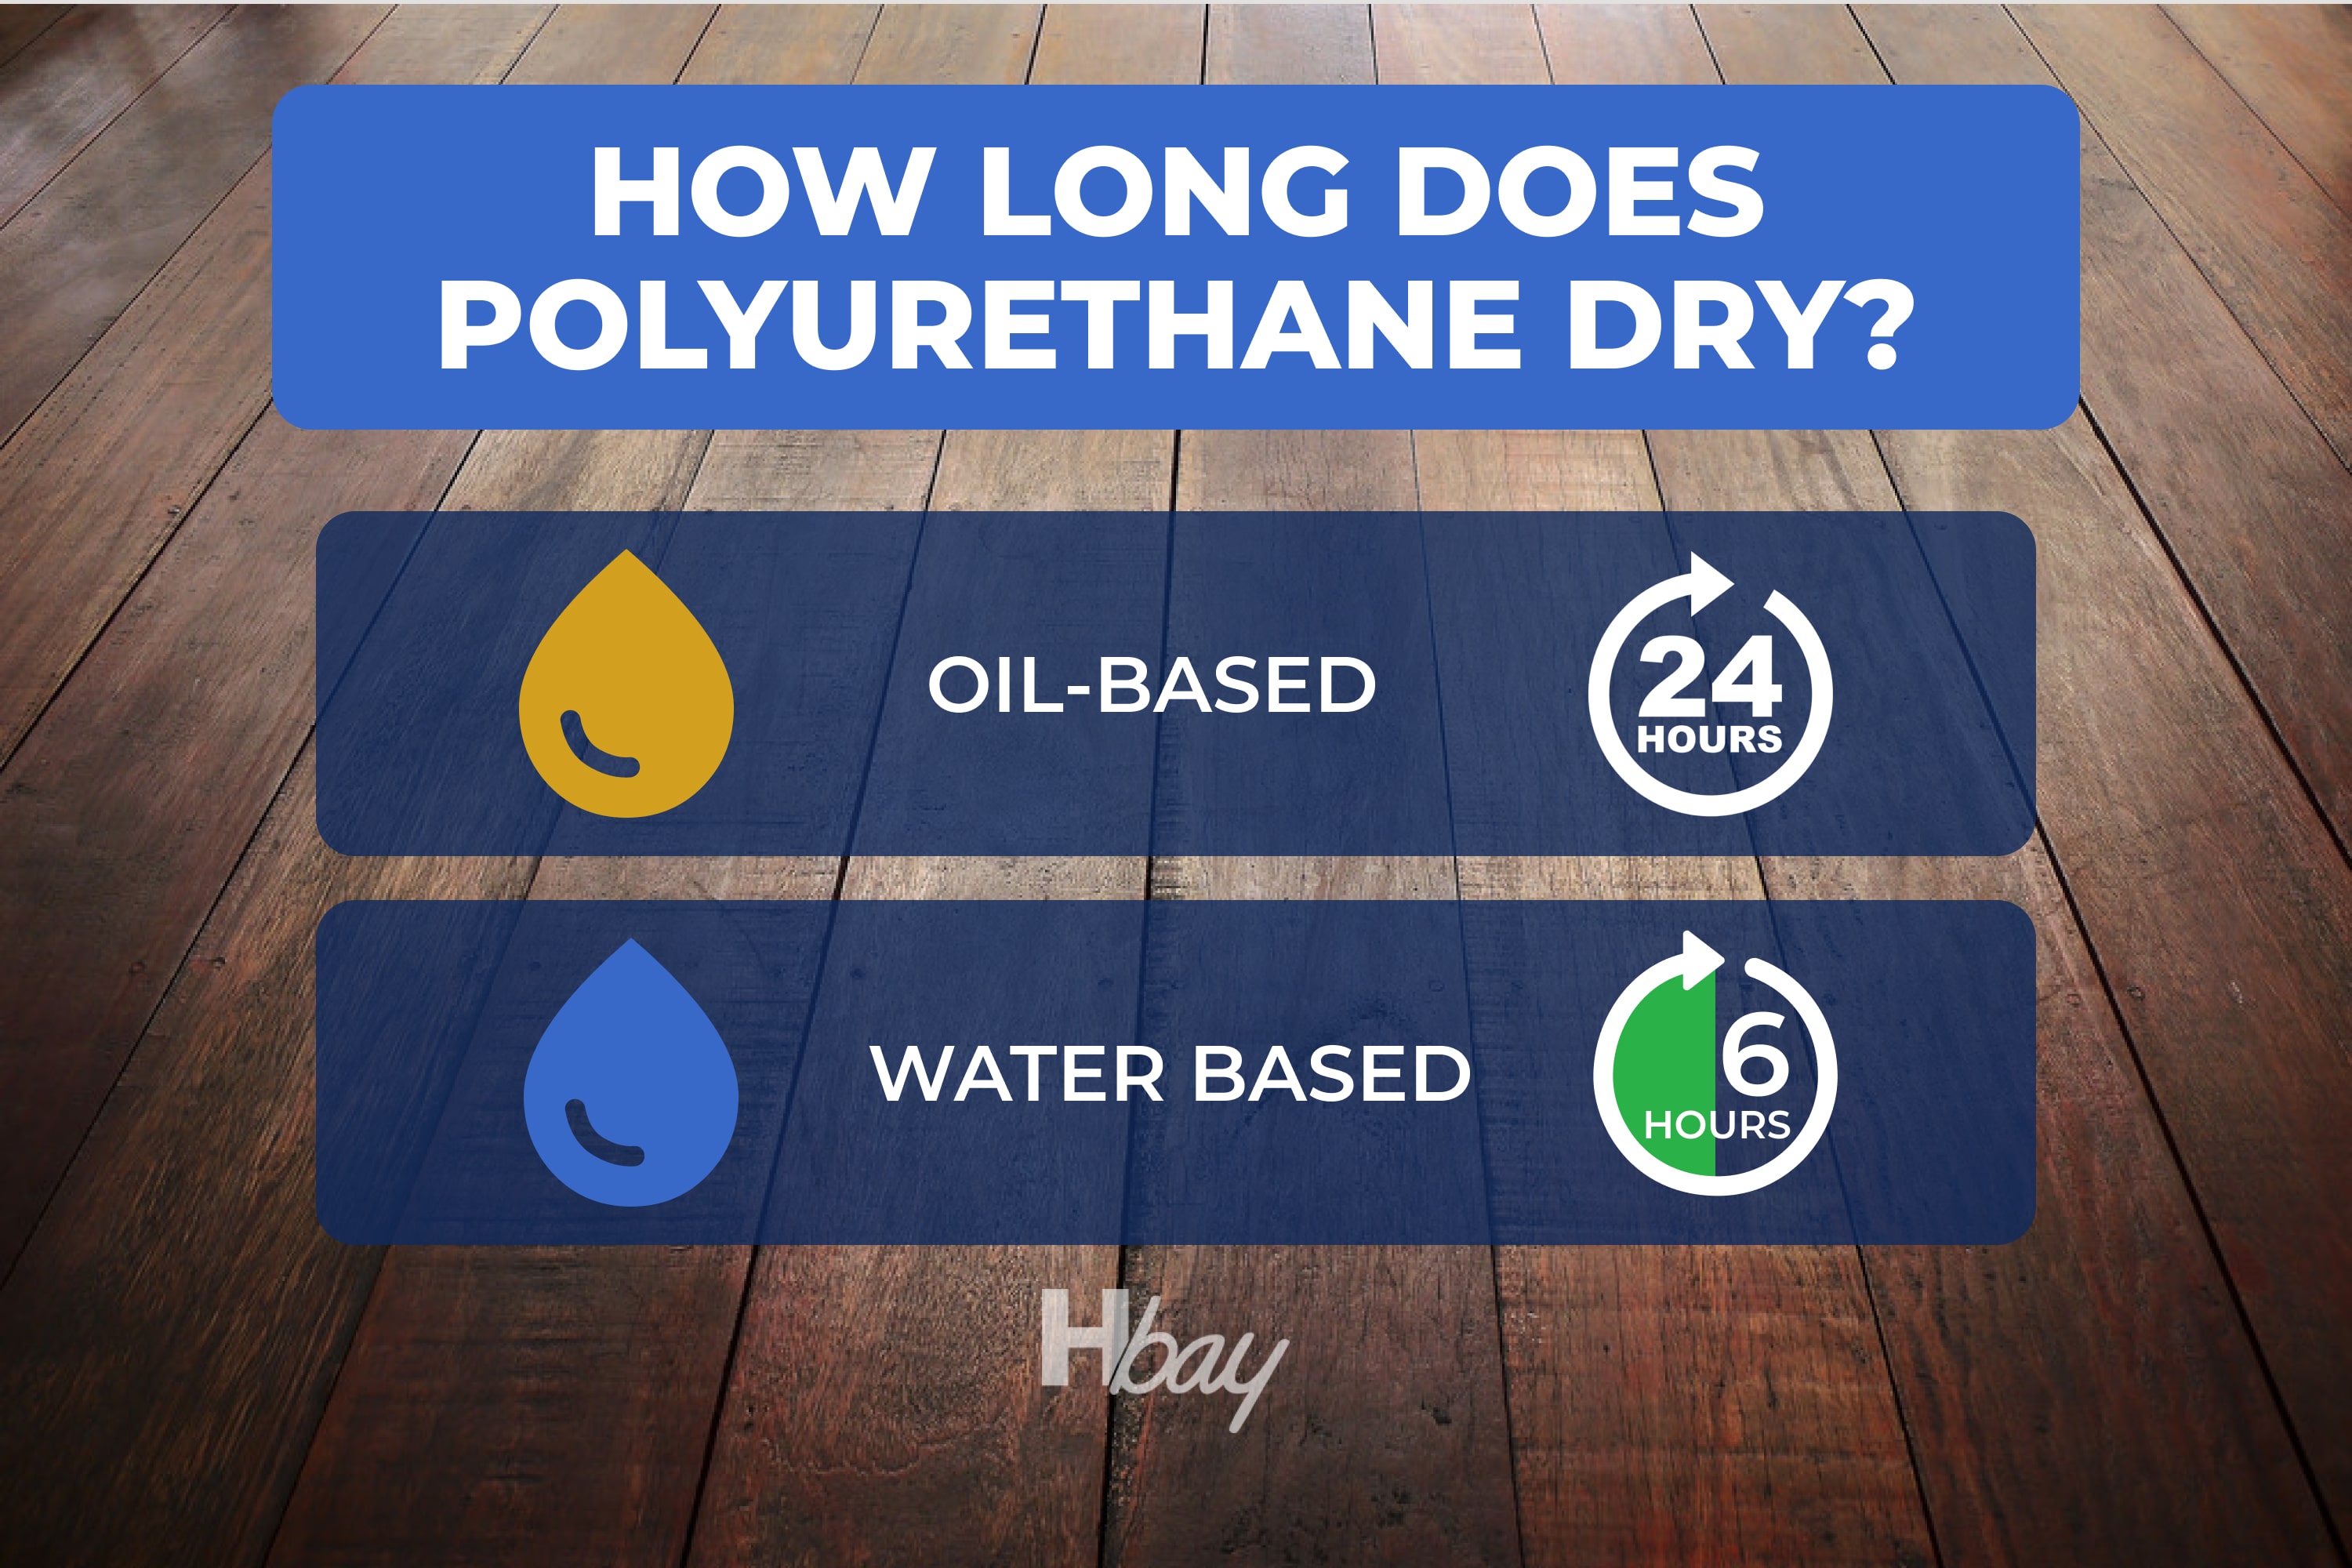 How long does polyurethane dry